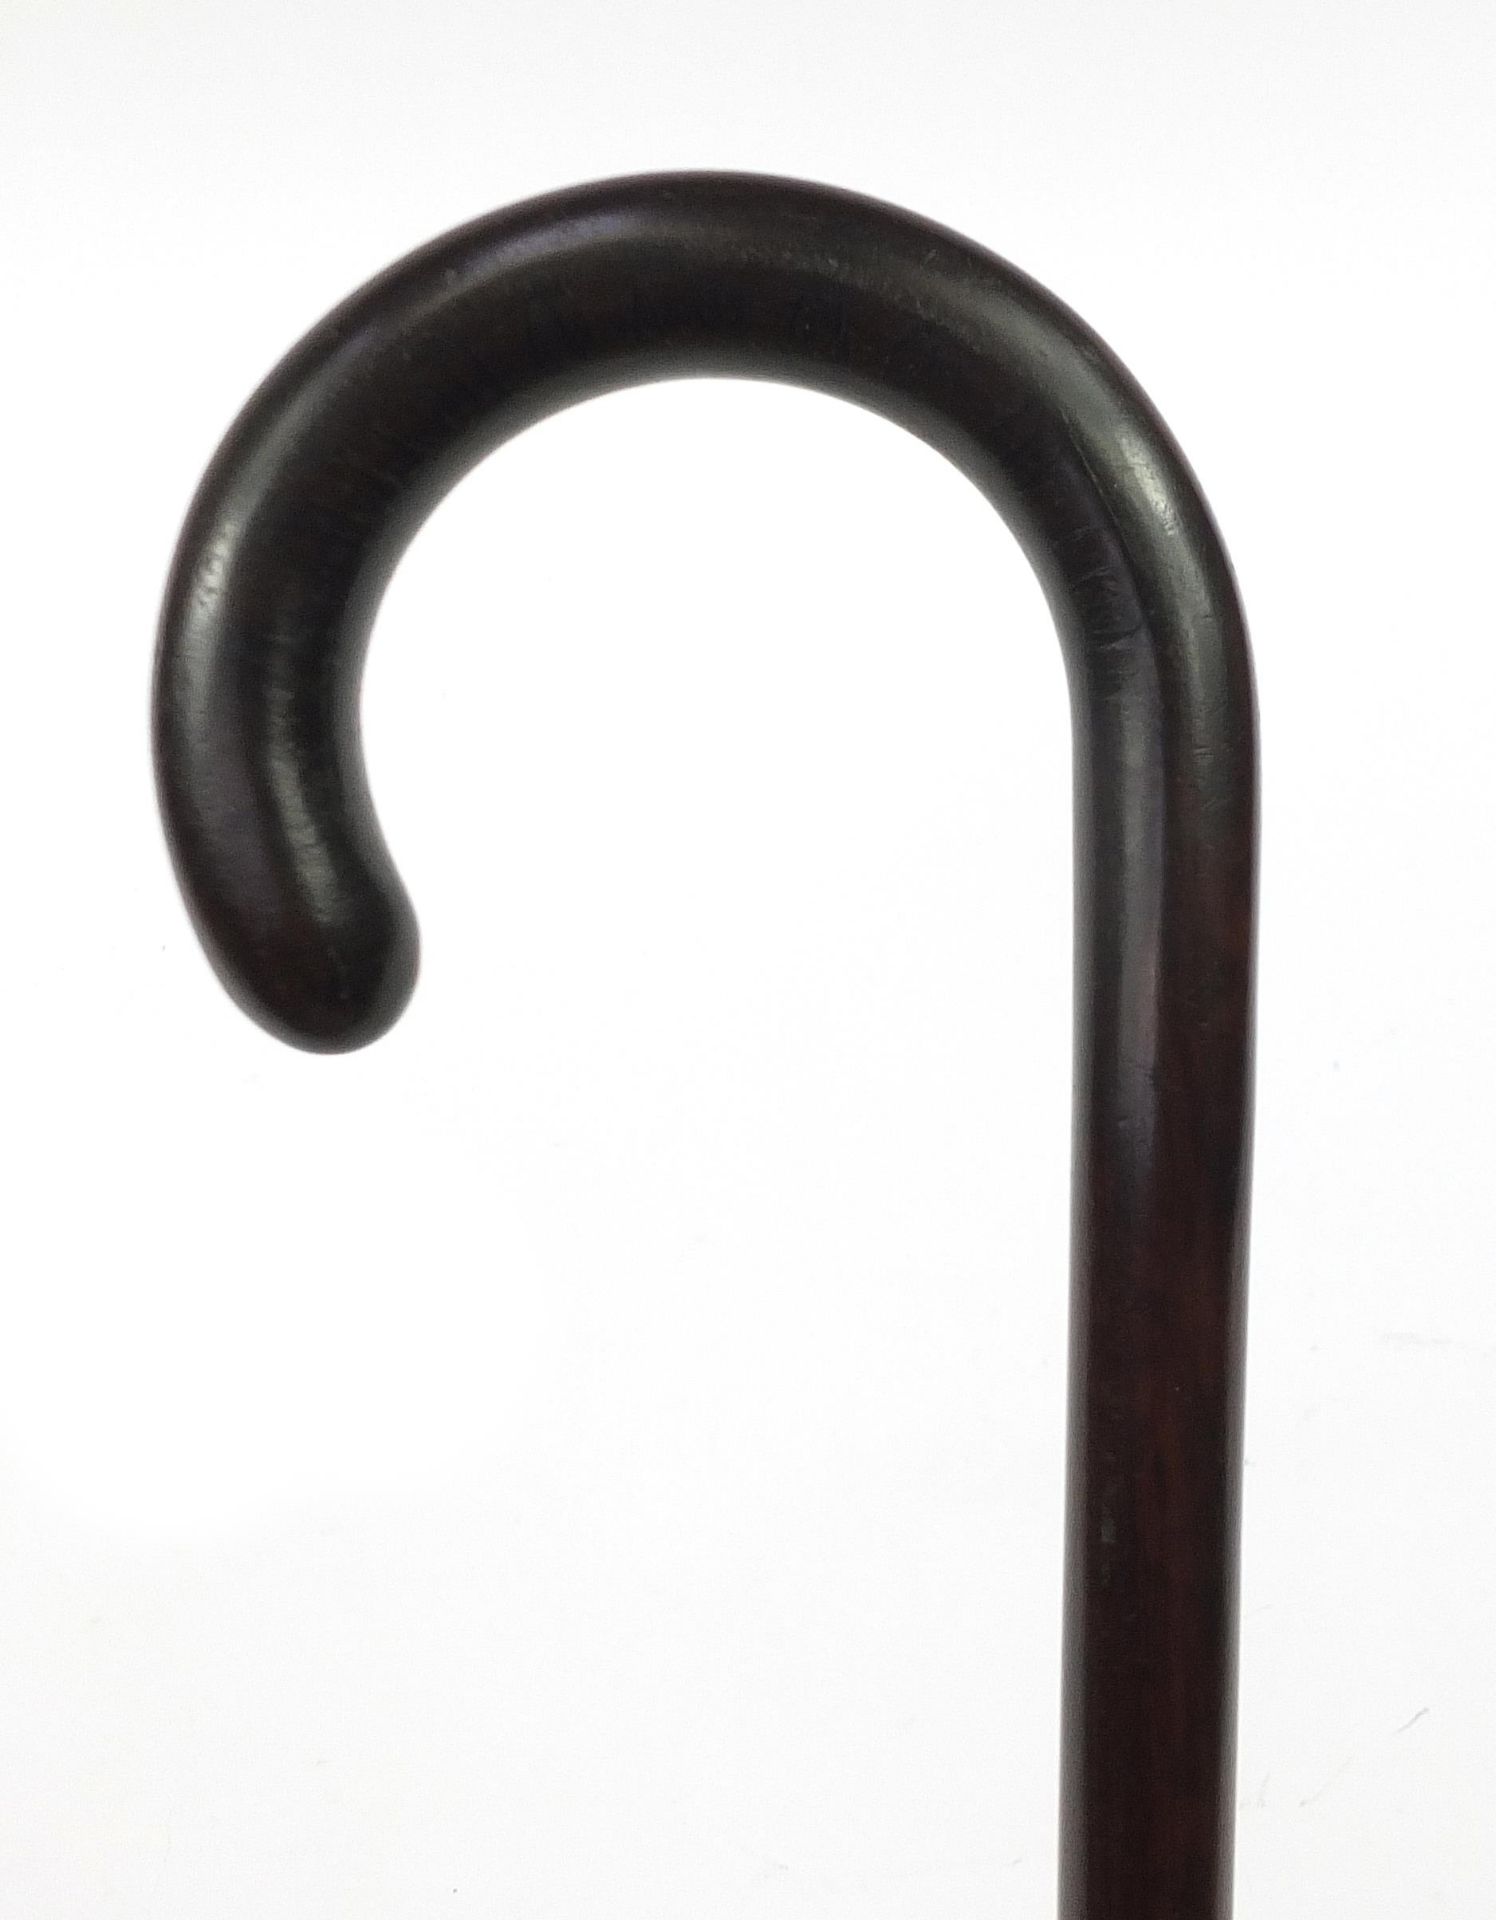 Snakewood walking cane with an ivory ferule, 82cm in length - Image 4 of 6